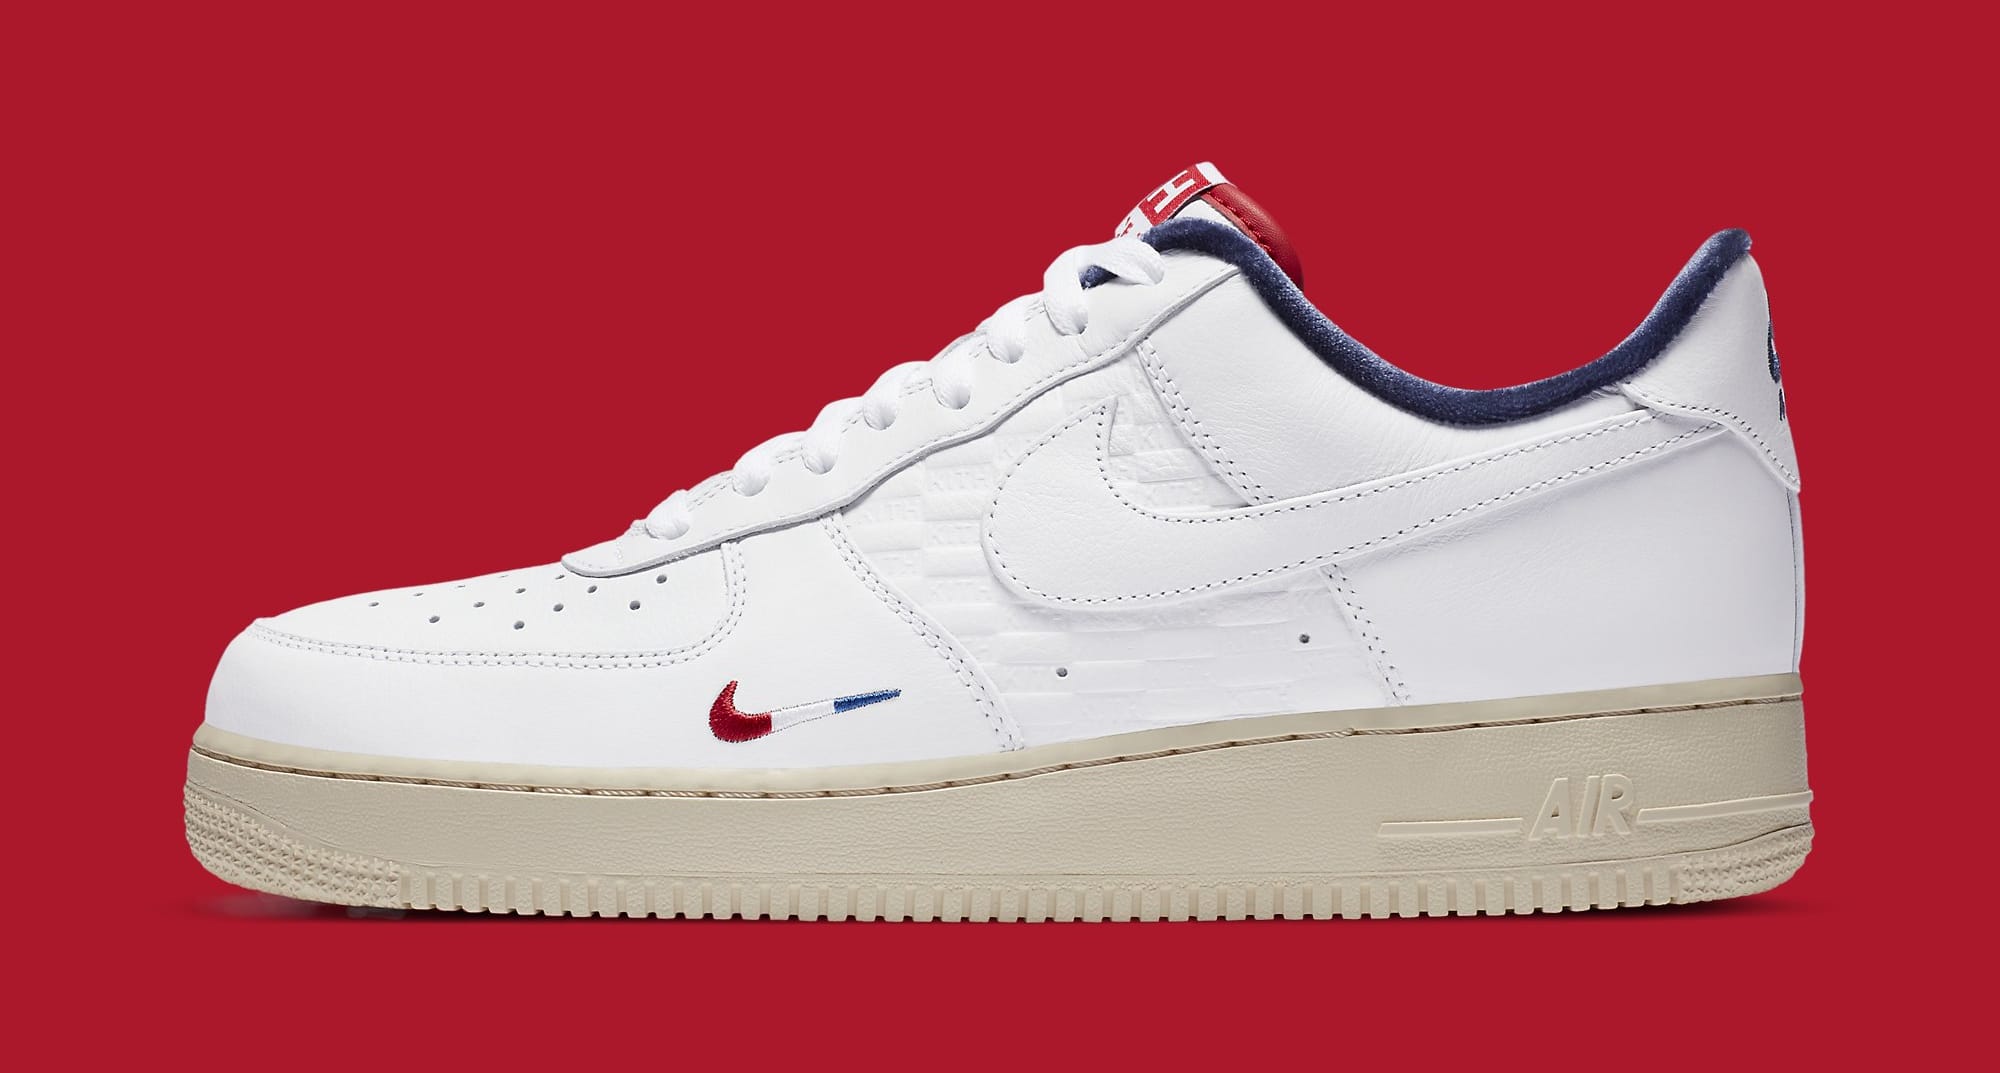 Kith's New Nike Air Force 1 Collab Is Releasing Exclusively in 